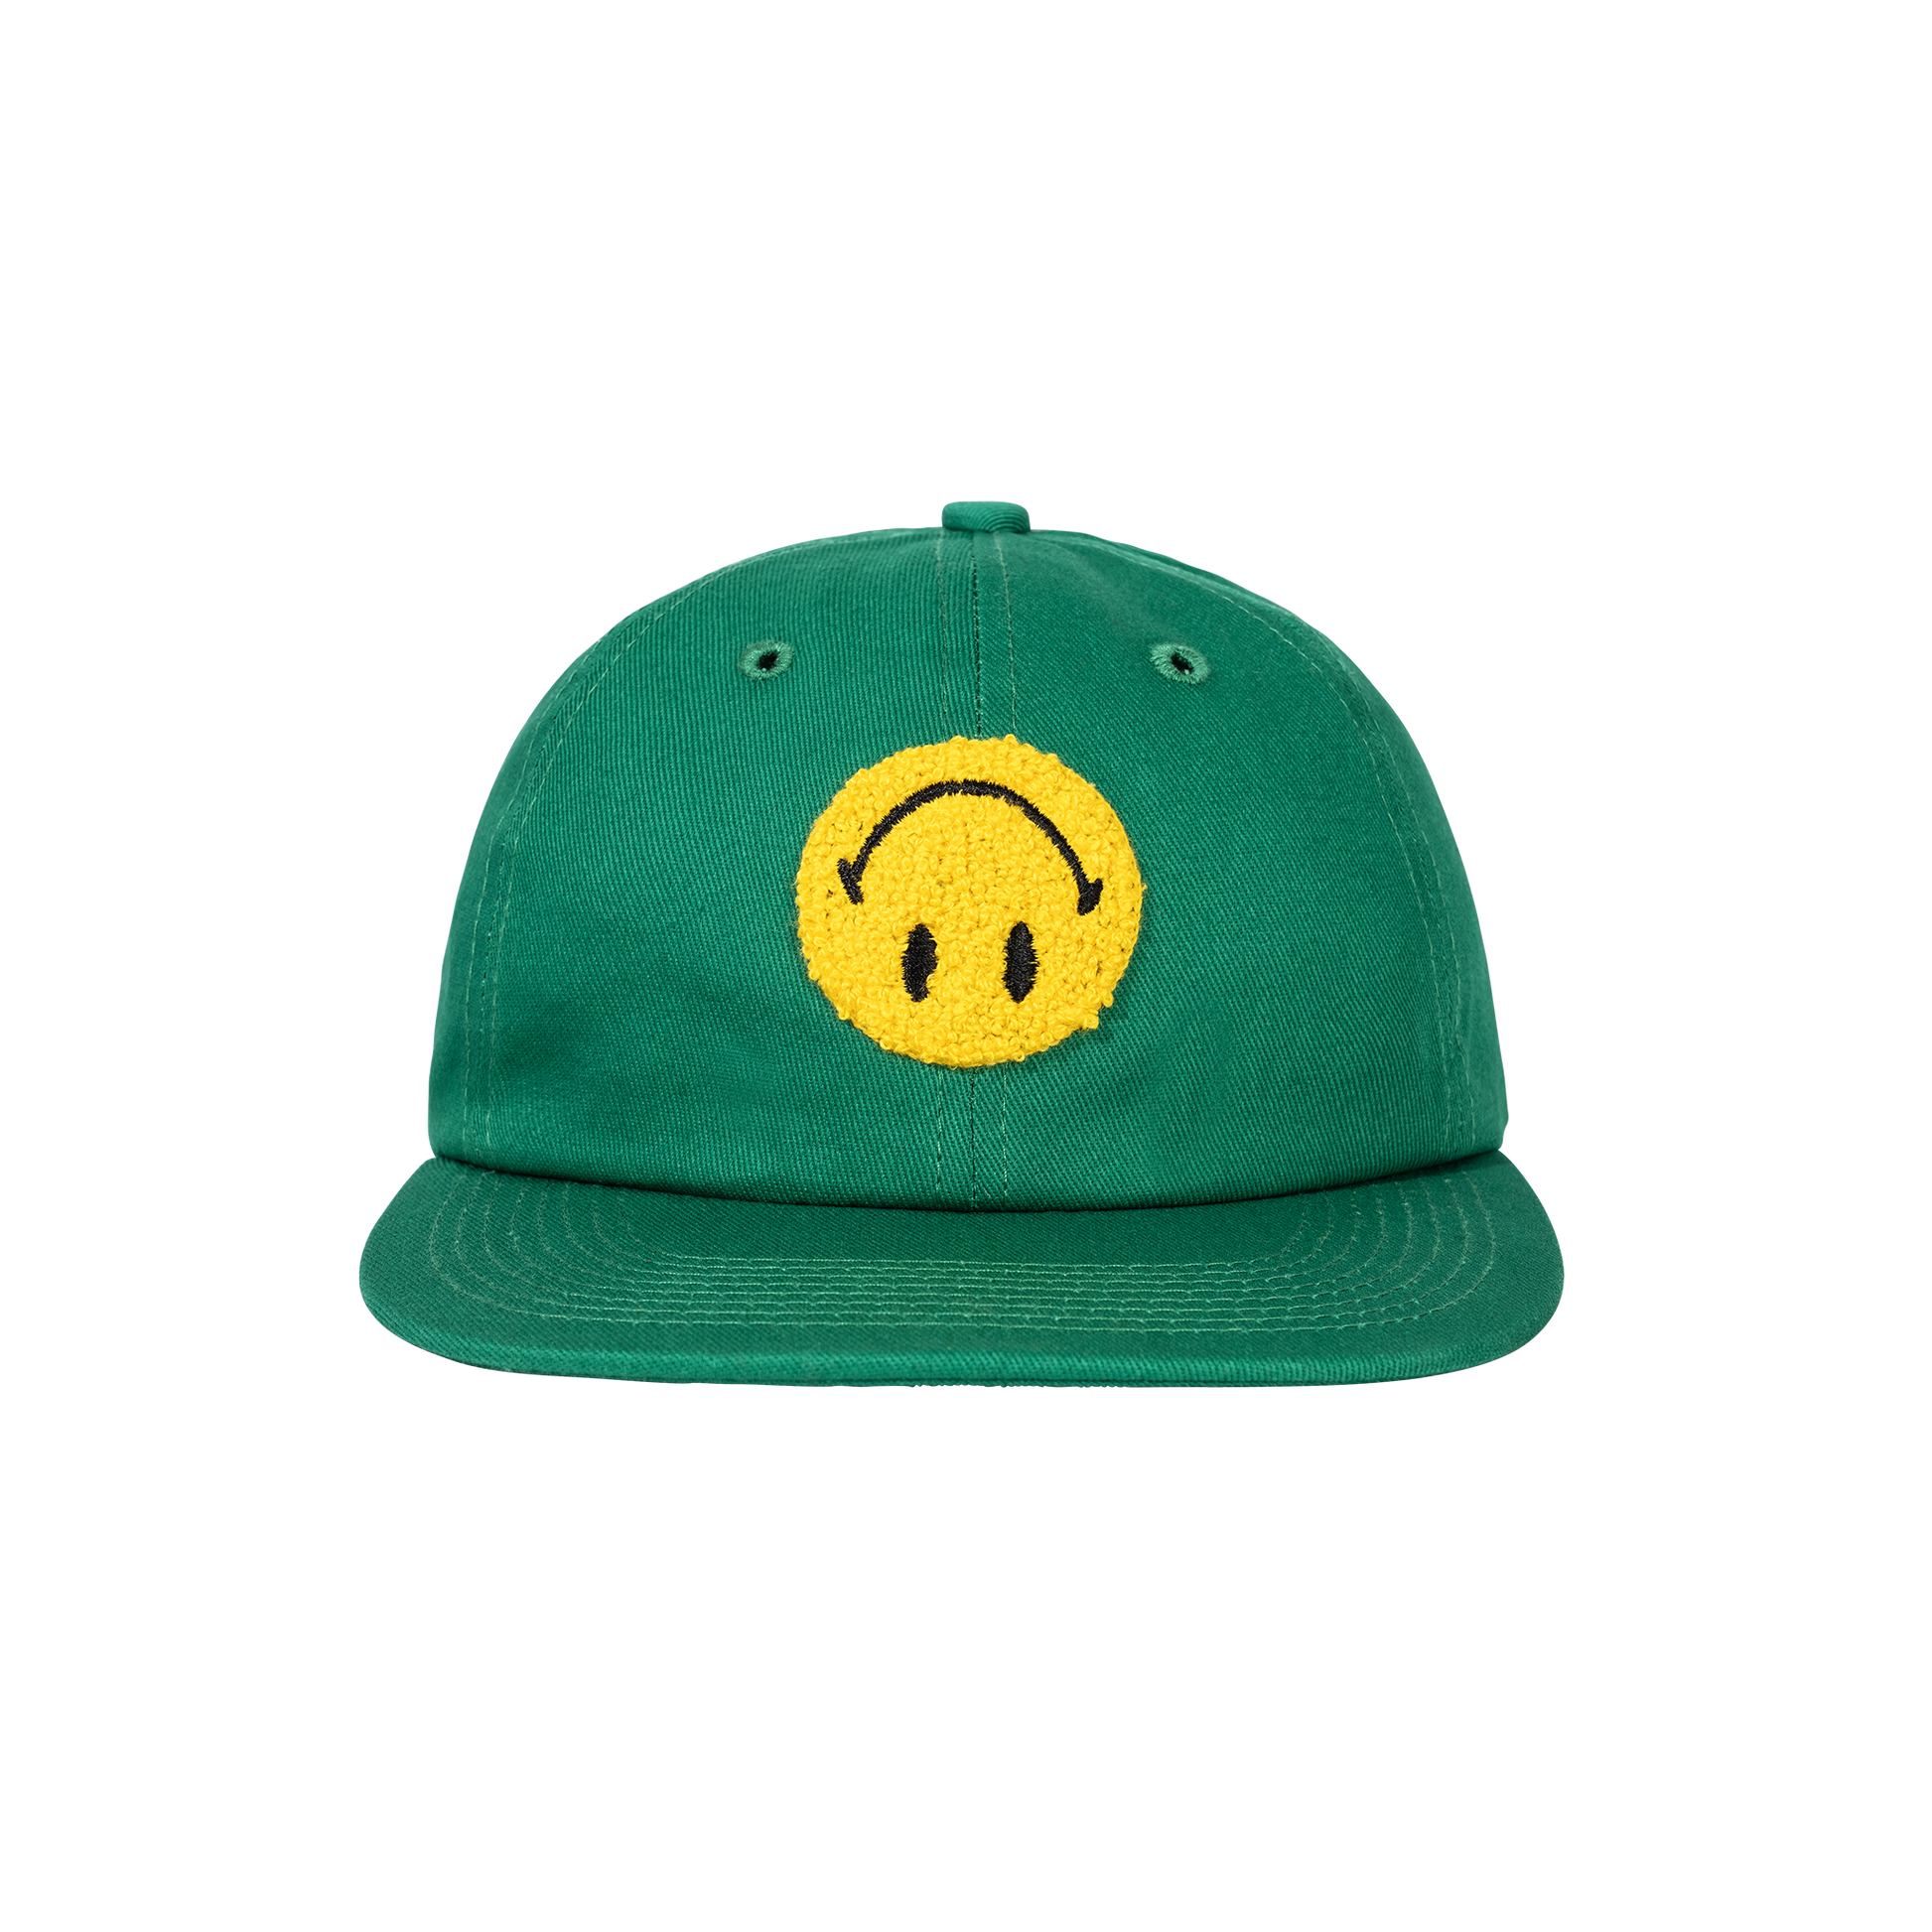 MARKET clothing brand SMILEY UPSIDE DOWN 6 PANEL HAT. Find more graphic tees, hats, beanies, hoodies at MarketStudios.com. Formally Chinatown Market. 